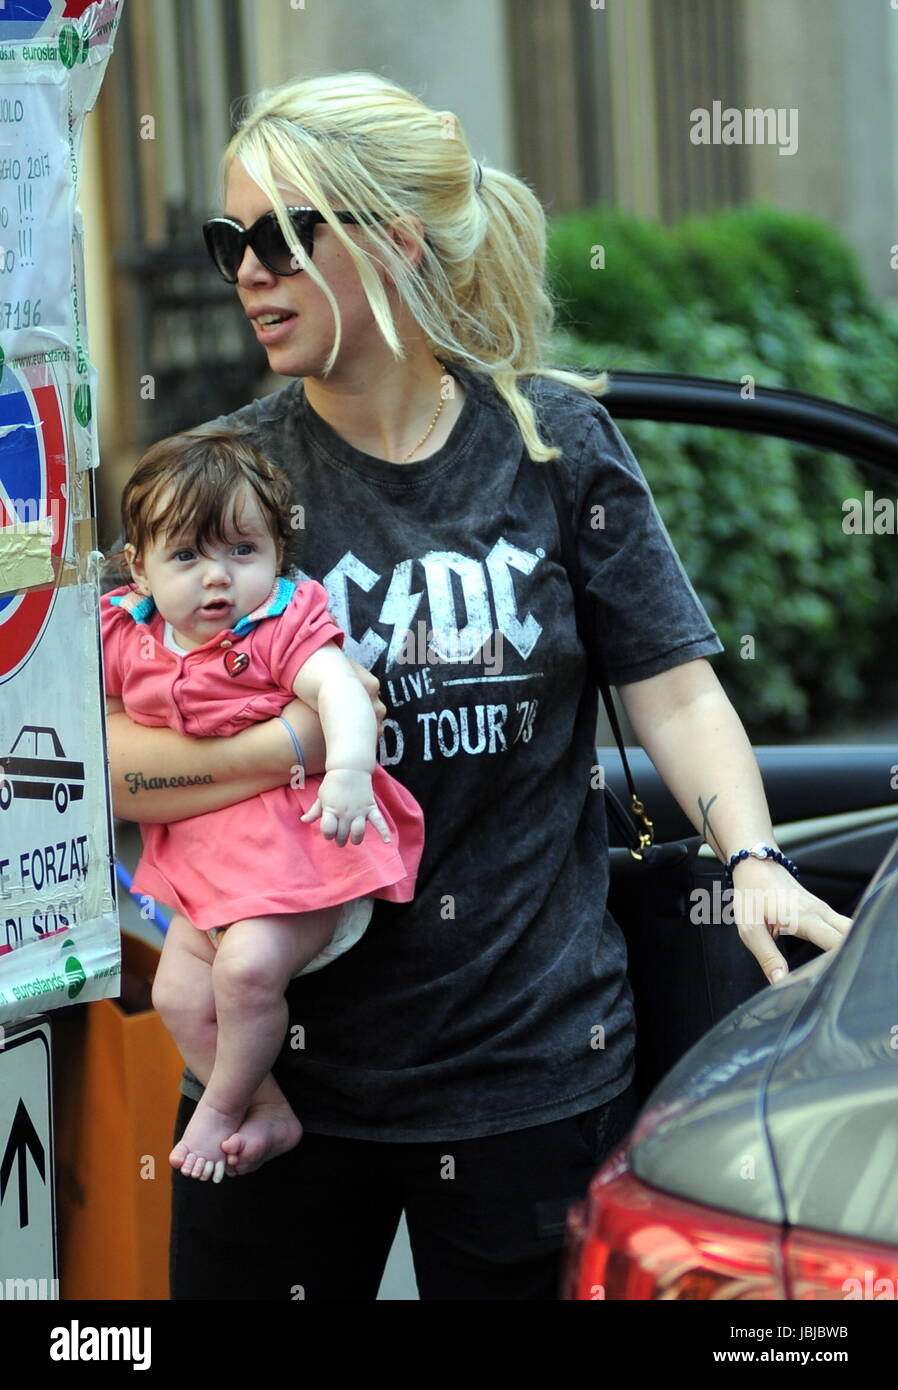 Wanda Nara shopping with her daughter, Isabella at GUCCI and LOUIS VUITTON  in Milan Featuring: Wanda Nara Where: Milan, Italy When: 10 May 2017  Credit: IPA/WENN.com **Only available for publication in UK